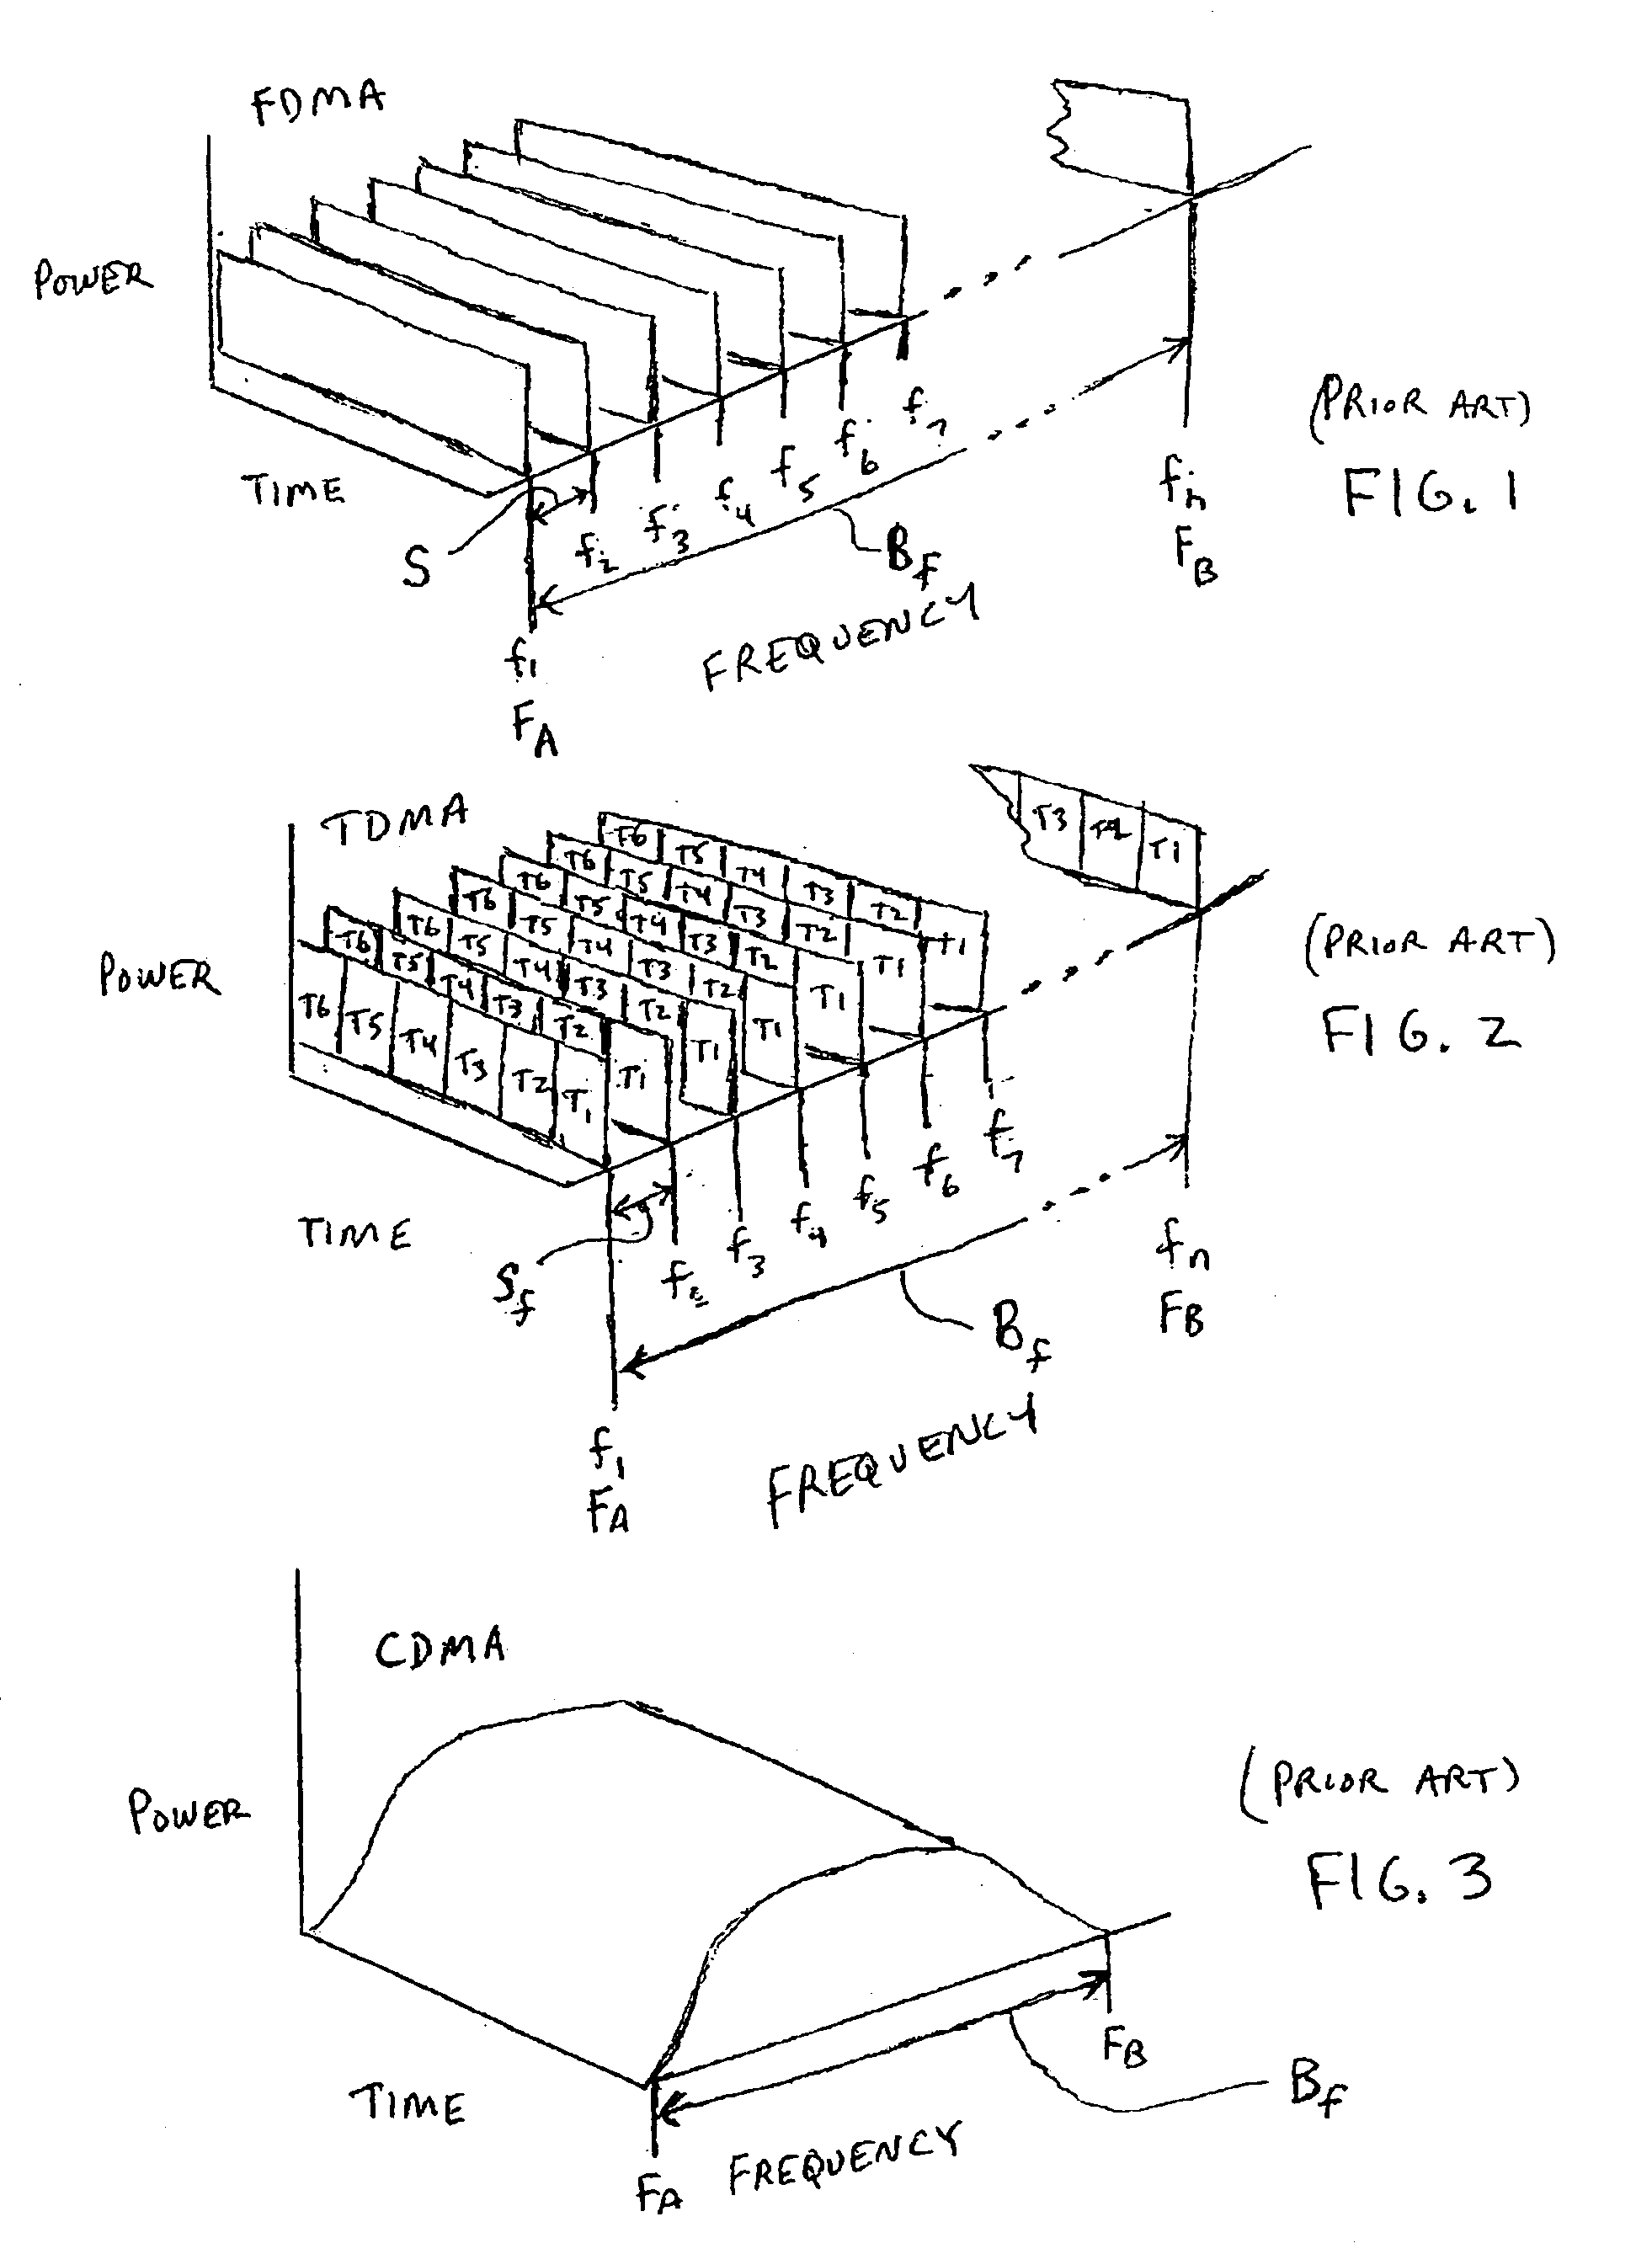 Multi-standard transmitter system and method for a wireless communication system